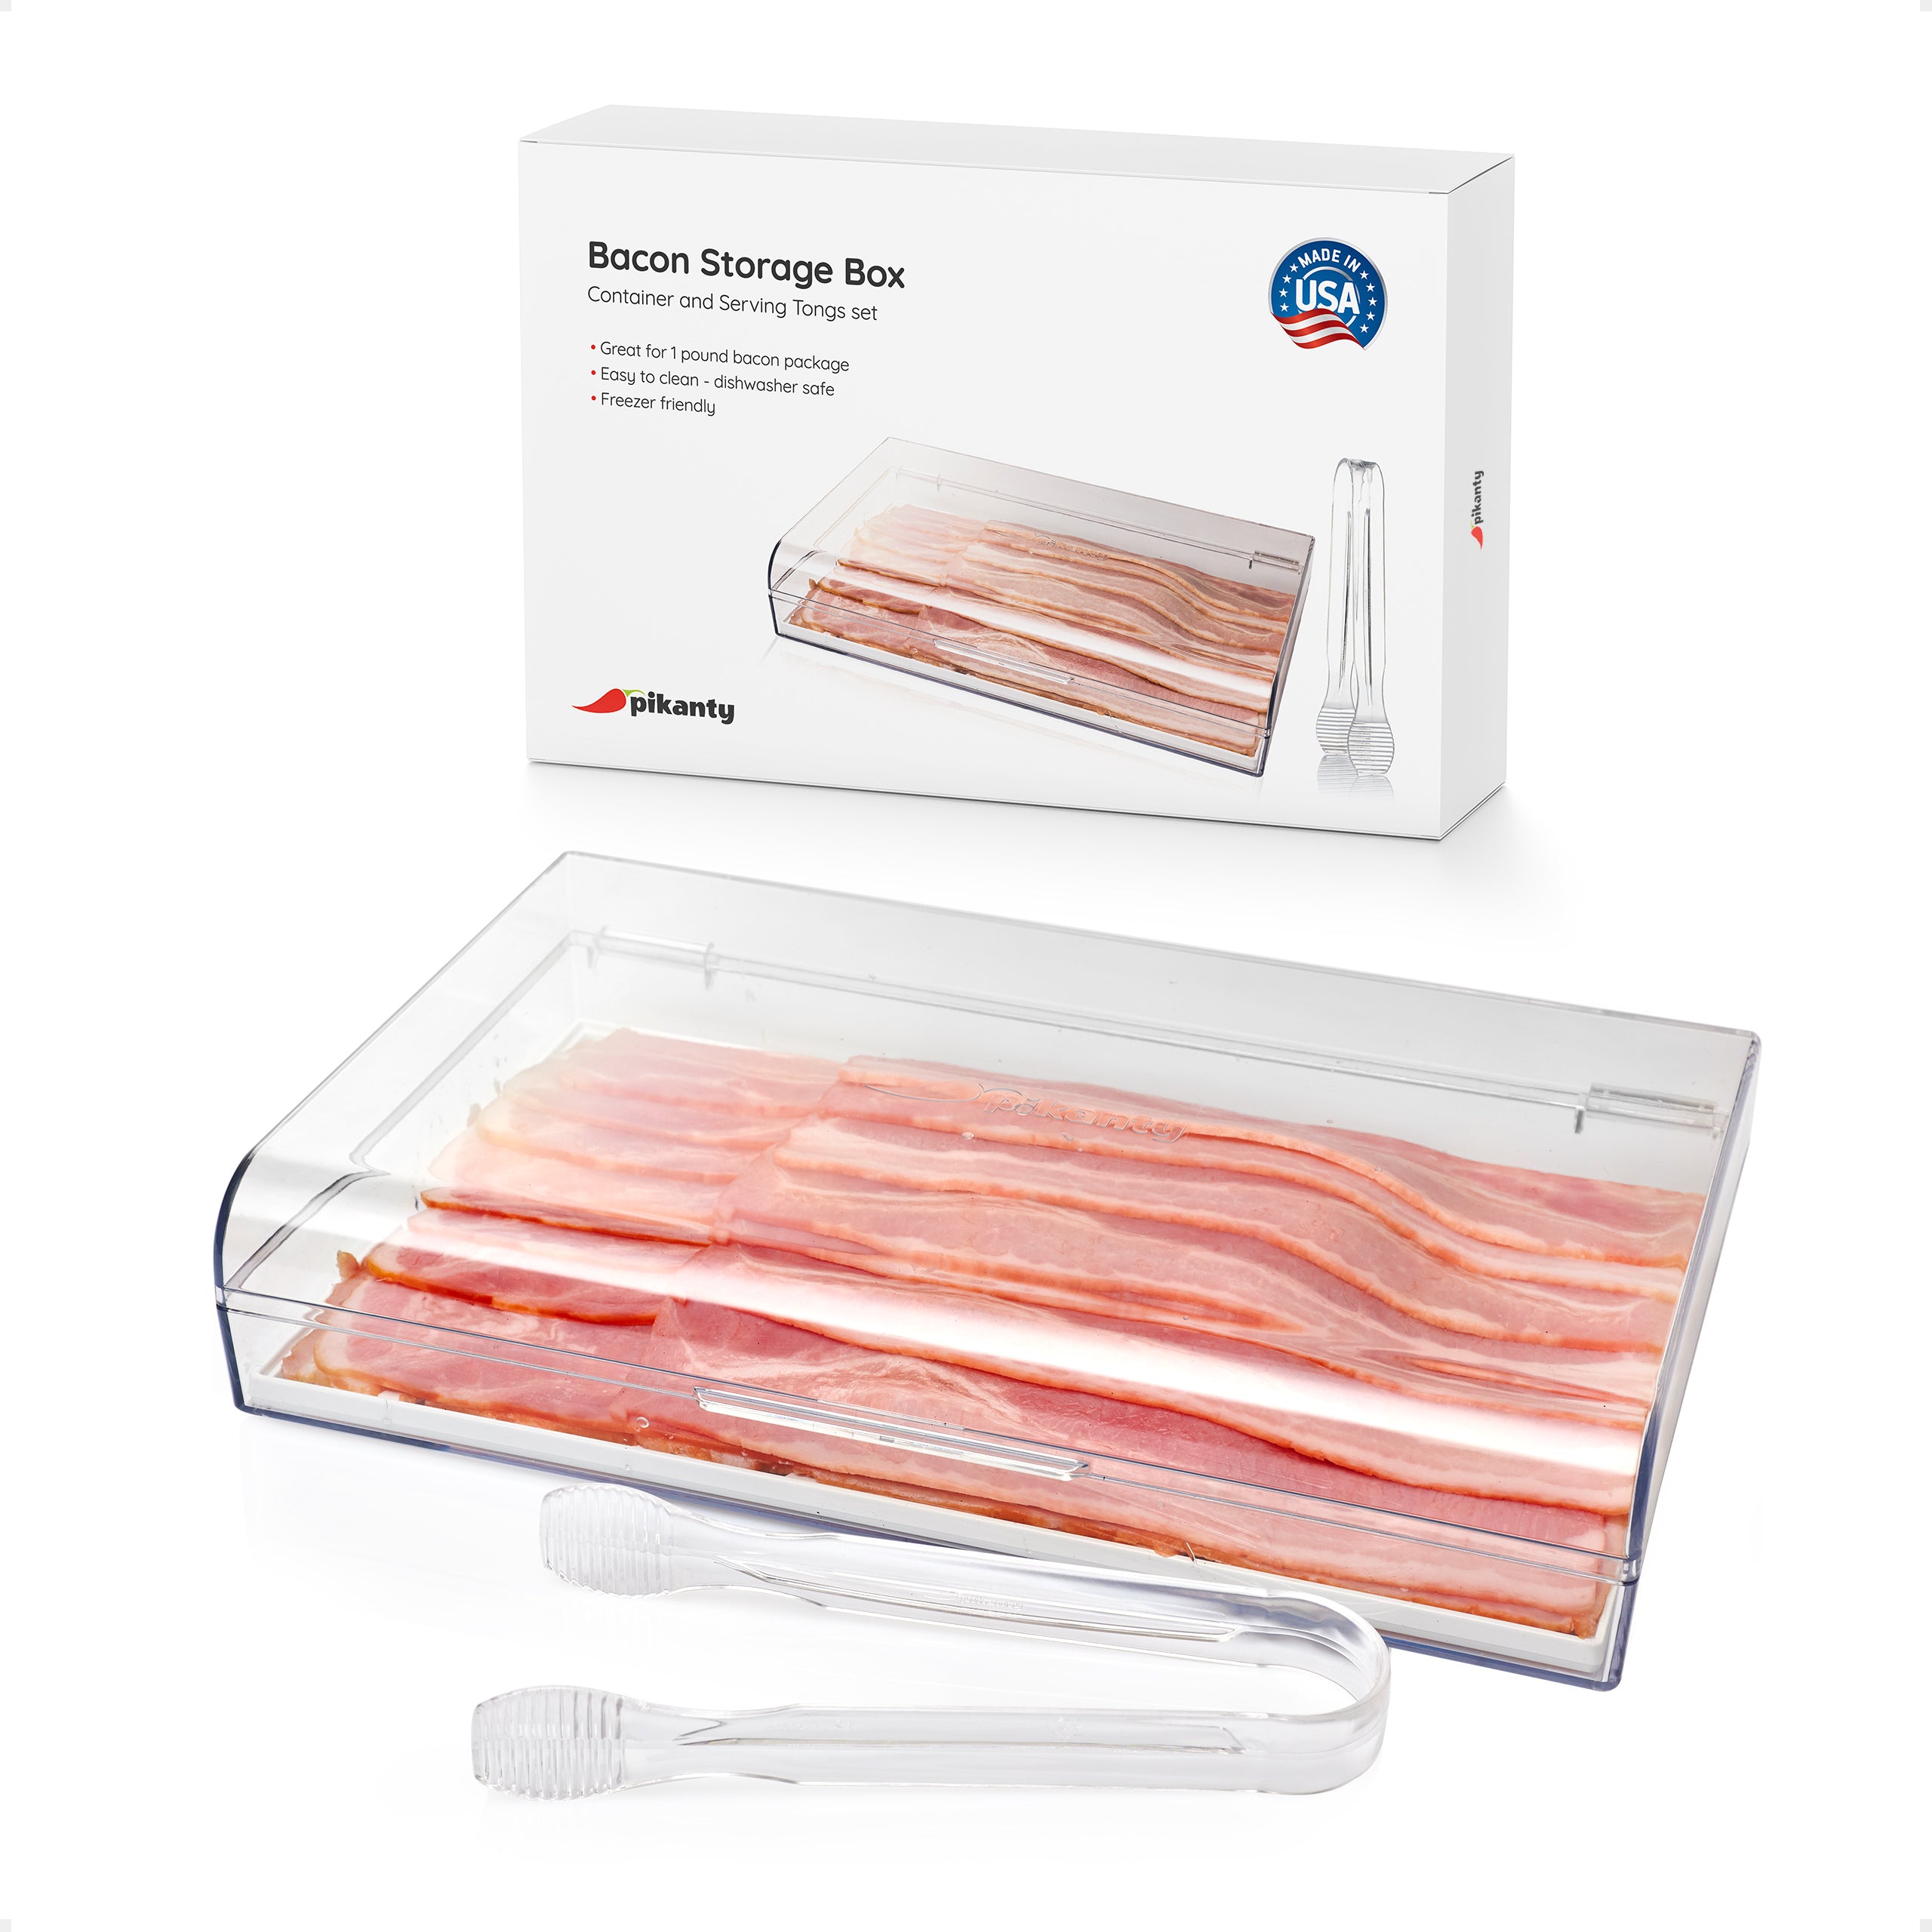 Bacon Keeper - Bacon Storage Container - Miles Kimball